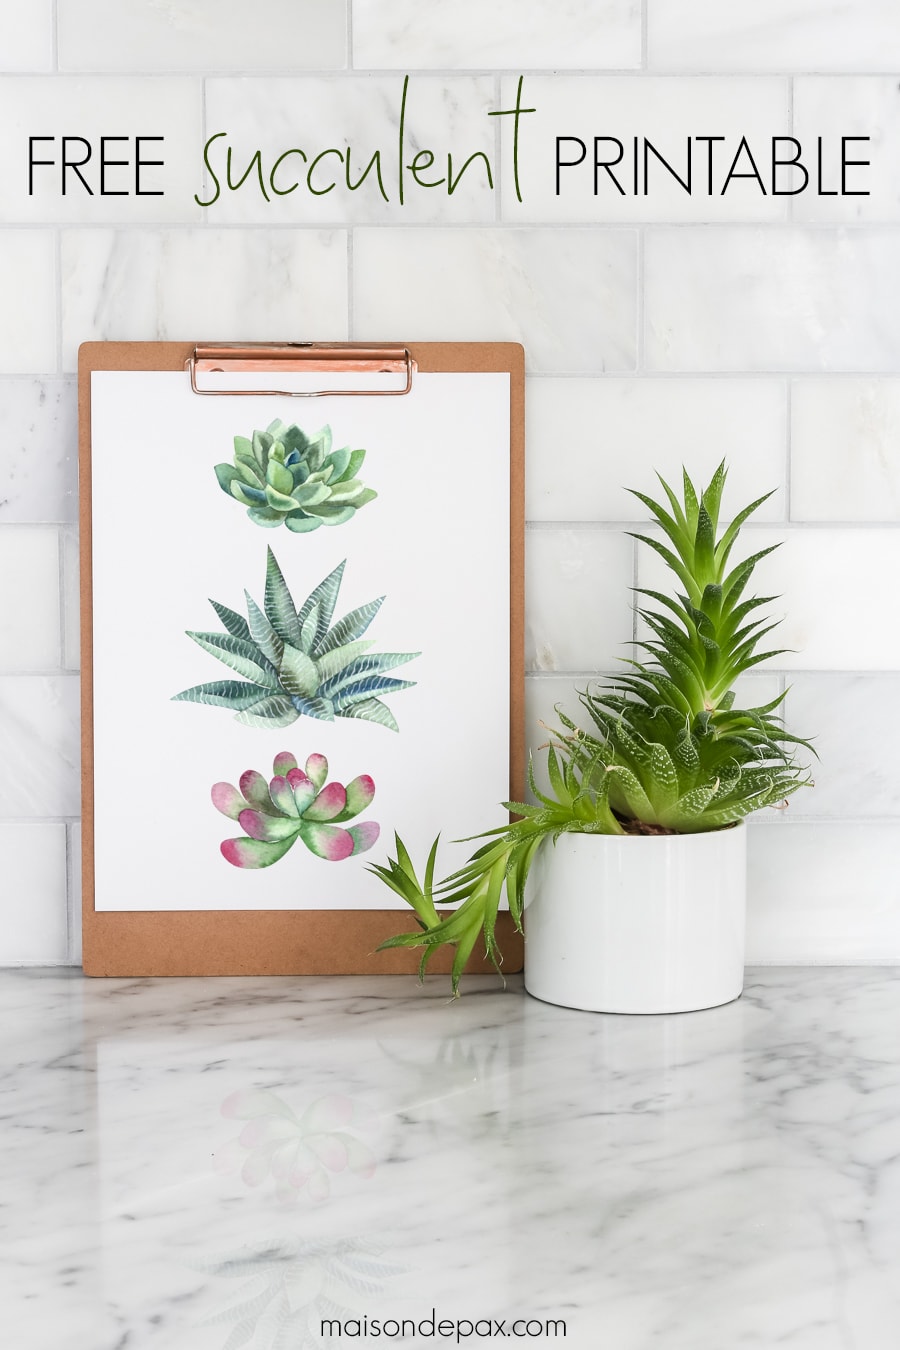 Free succulent printable art: Print this succulent wall art to decorate your space for summer! #freeprintable #printableart #succulent #wallart #succulentart #watercolor #printable #printablewatercolor #summerdecor